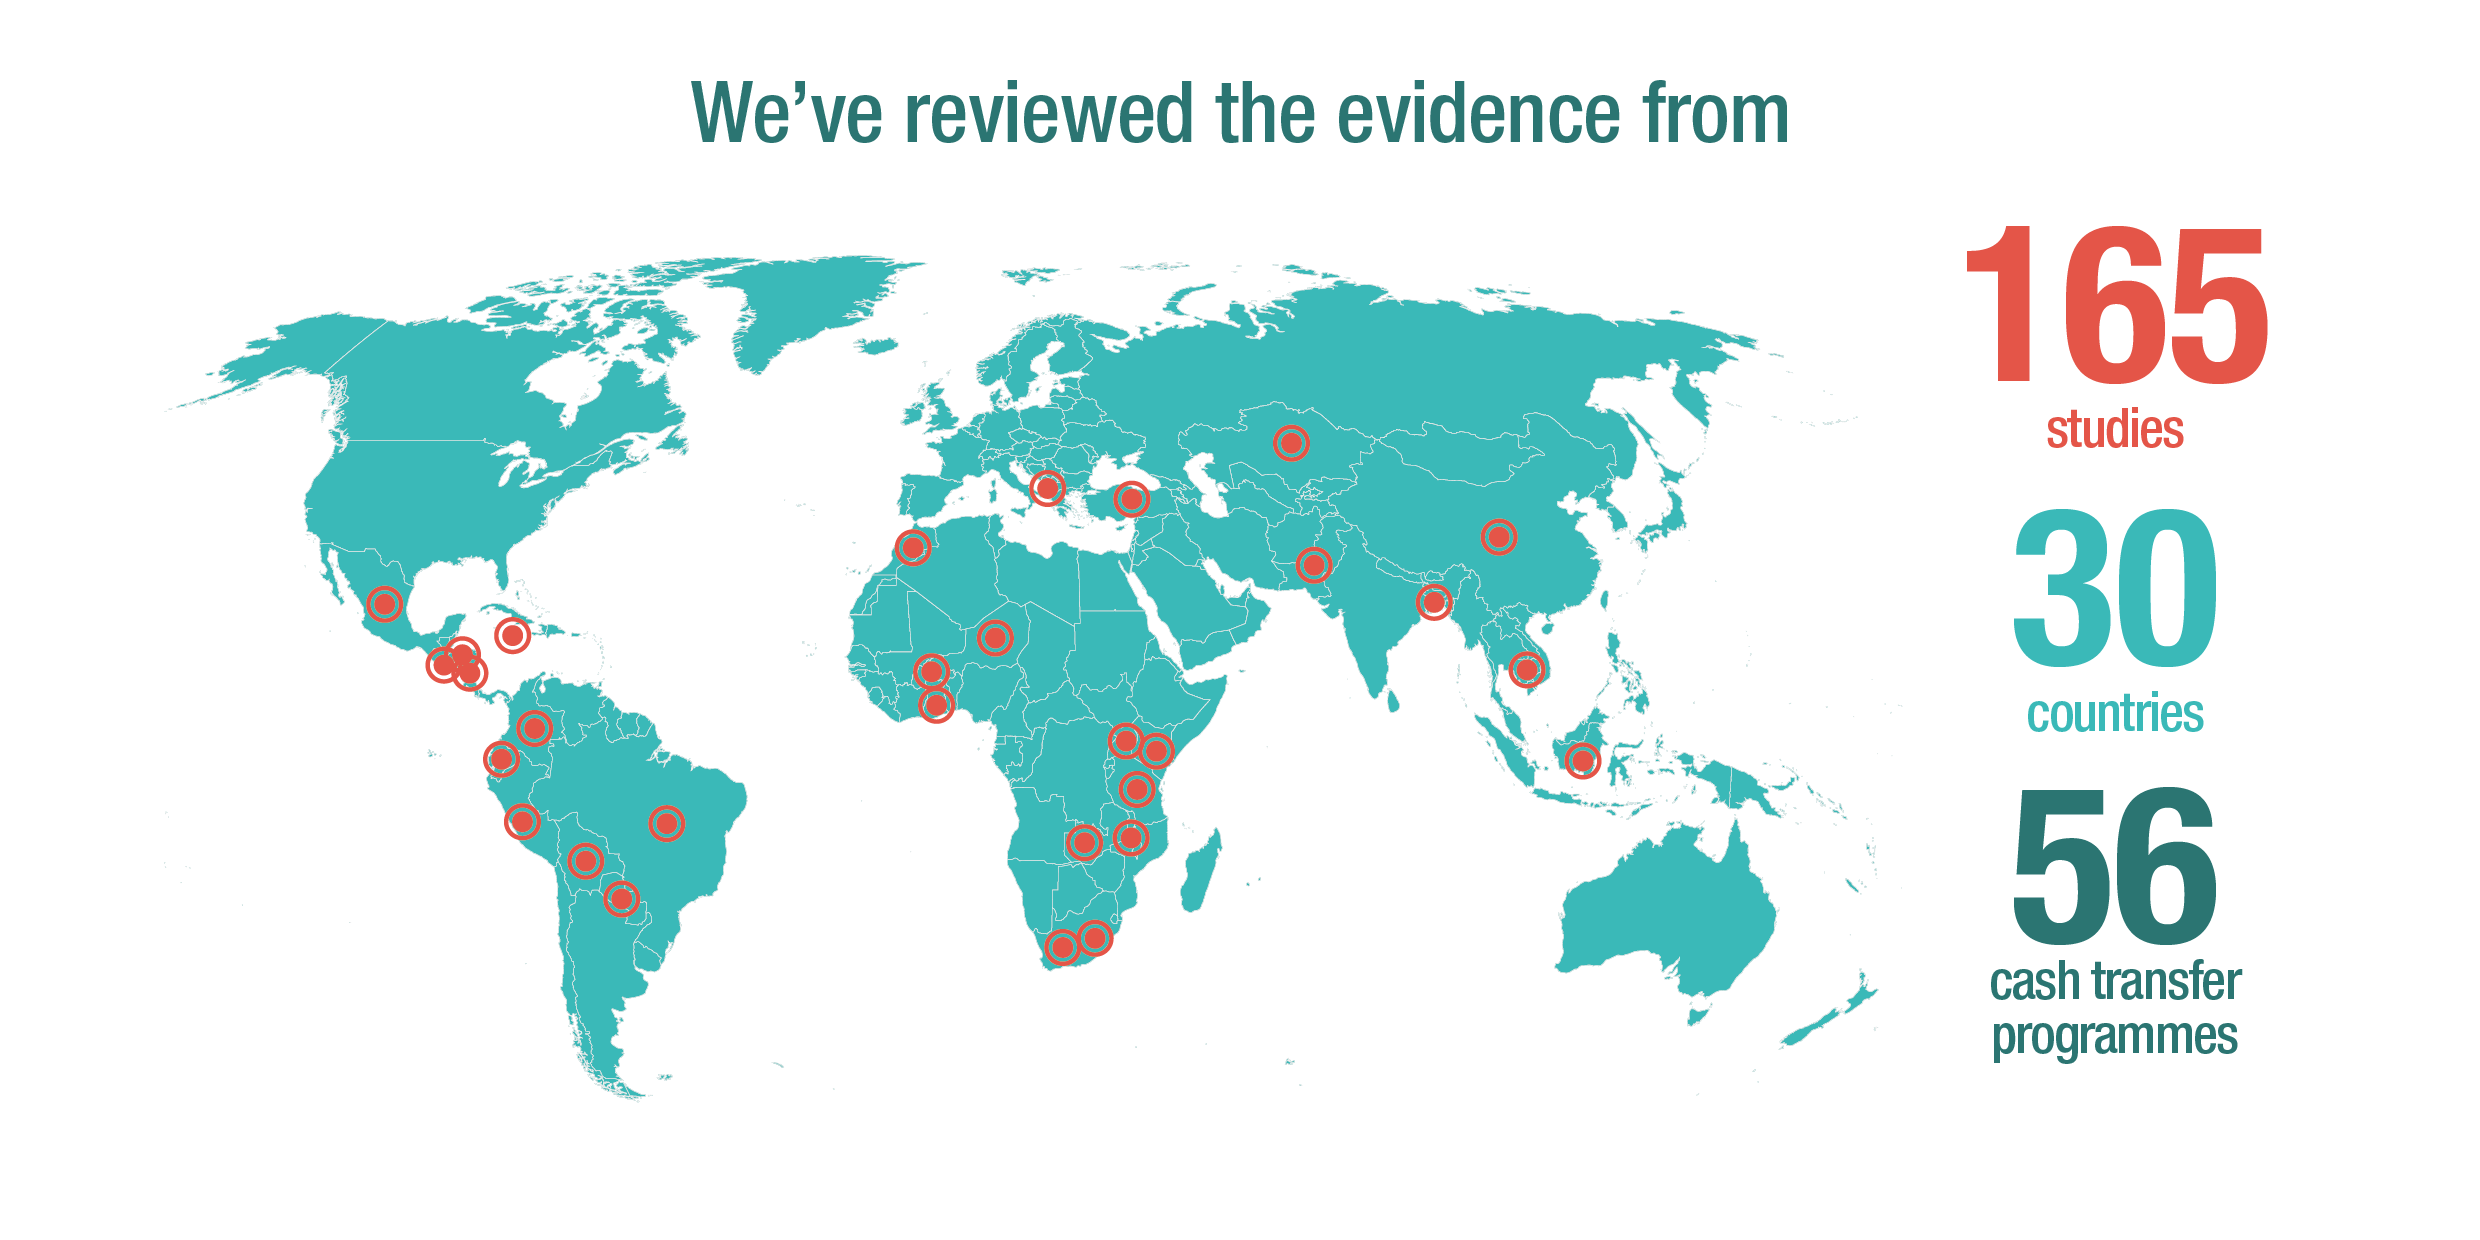 Overview of evidence base for the report